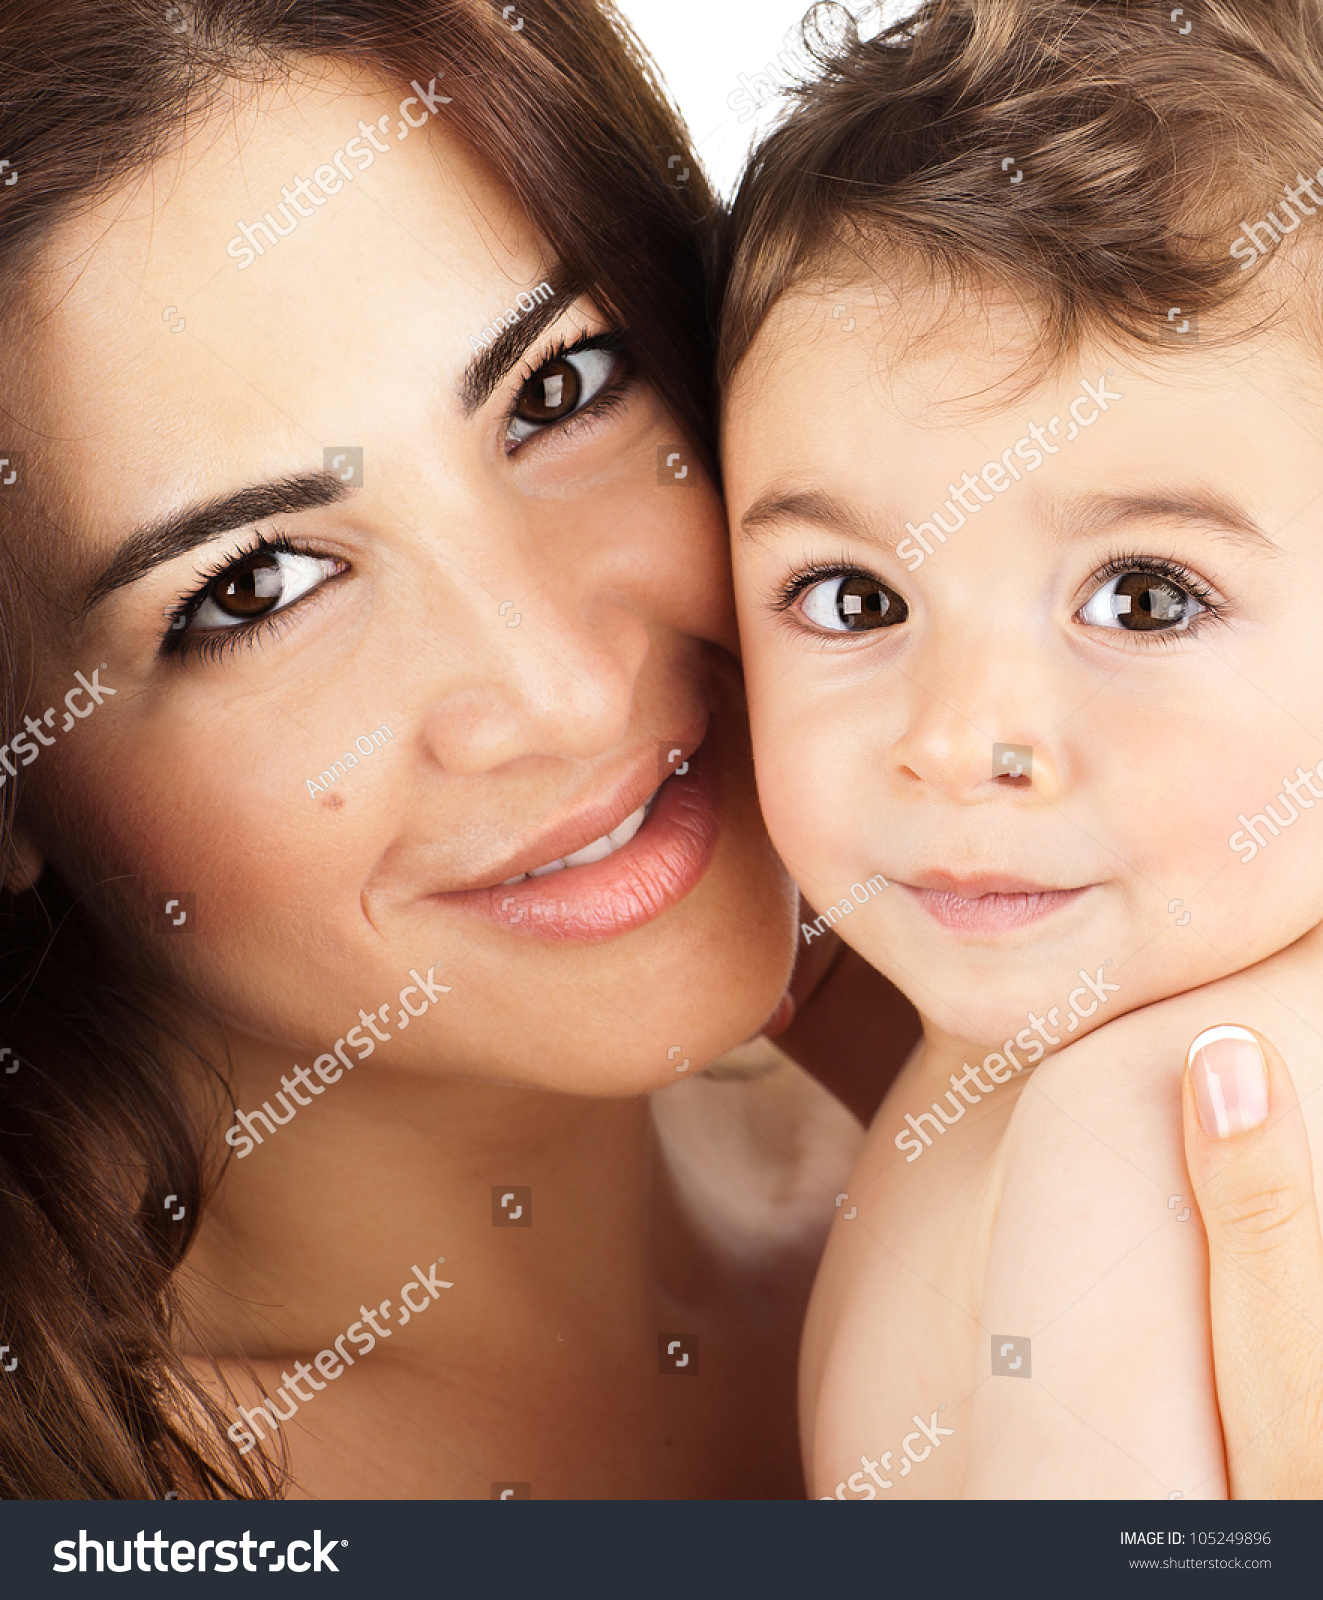 Mother and baby closeup portrait, happy faces, Arabic family picture, adorable small boy, mom and kid having fun indoor, parents joy, holding little child, healthy toddler and mommy, happiness concept #105249896